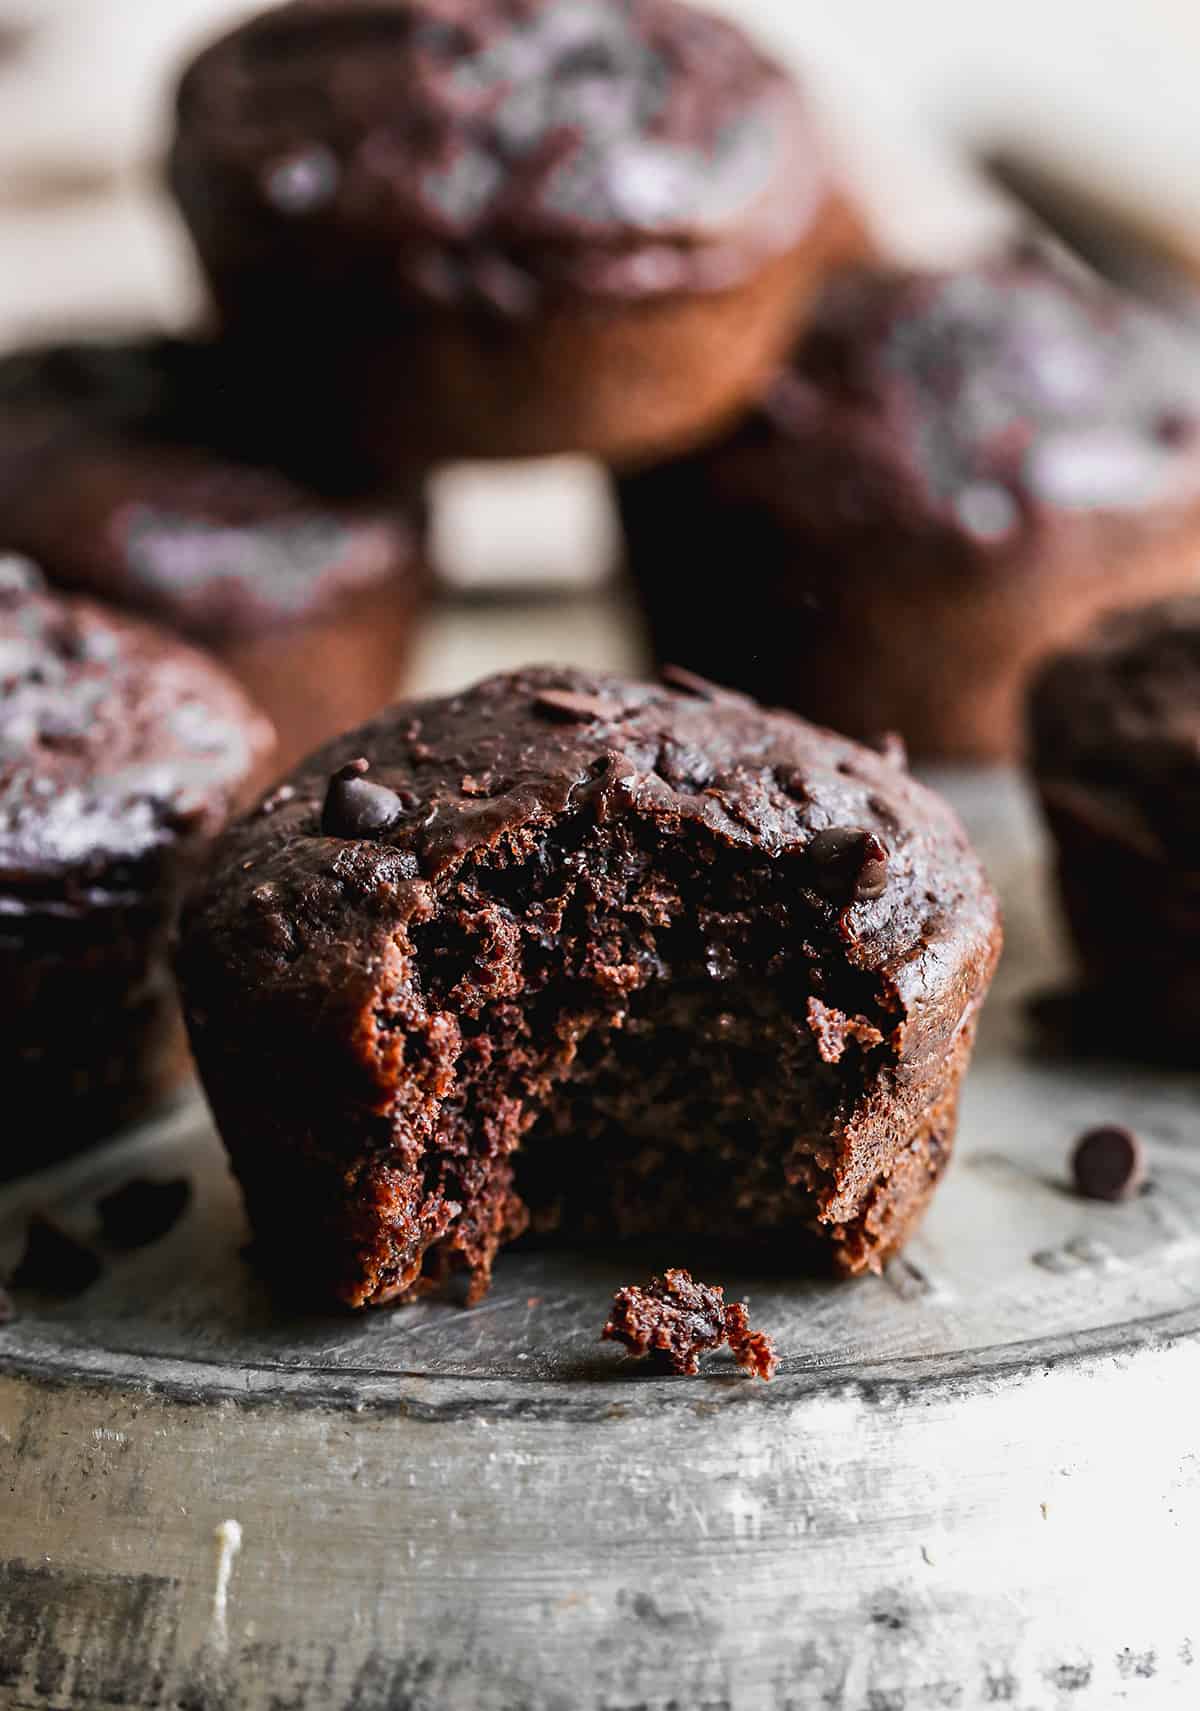 A healthy chocolate muffin with a bite taken out to show how moist and delicious it is.